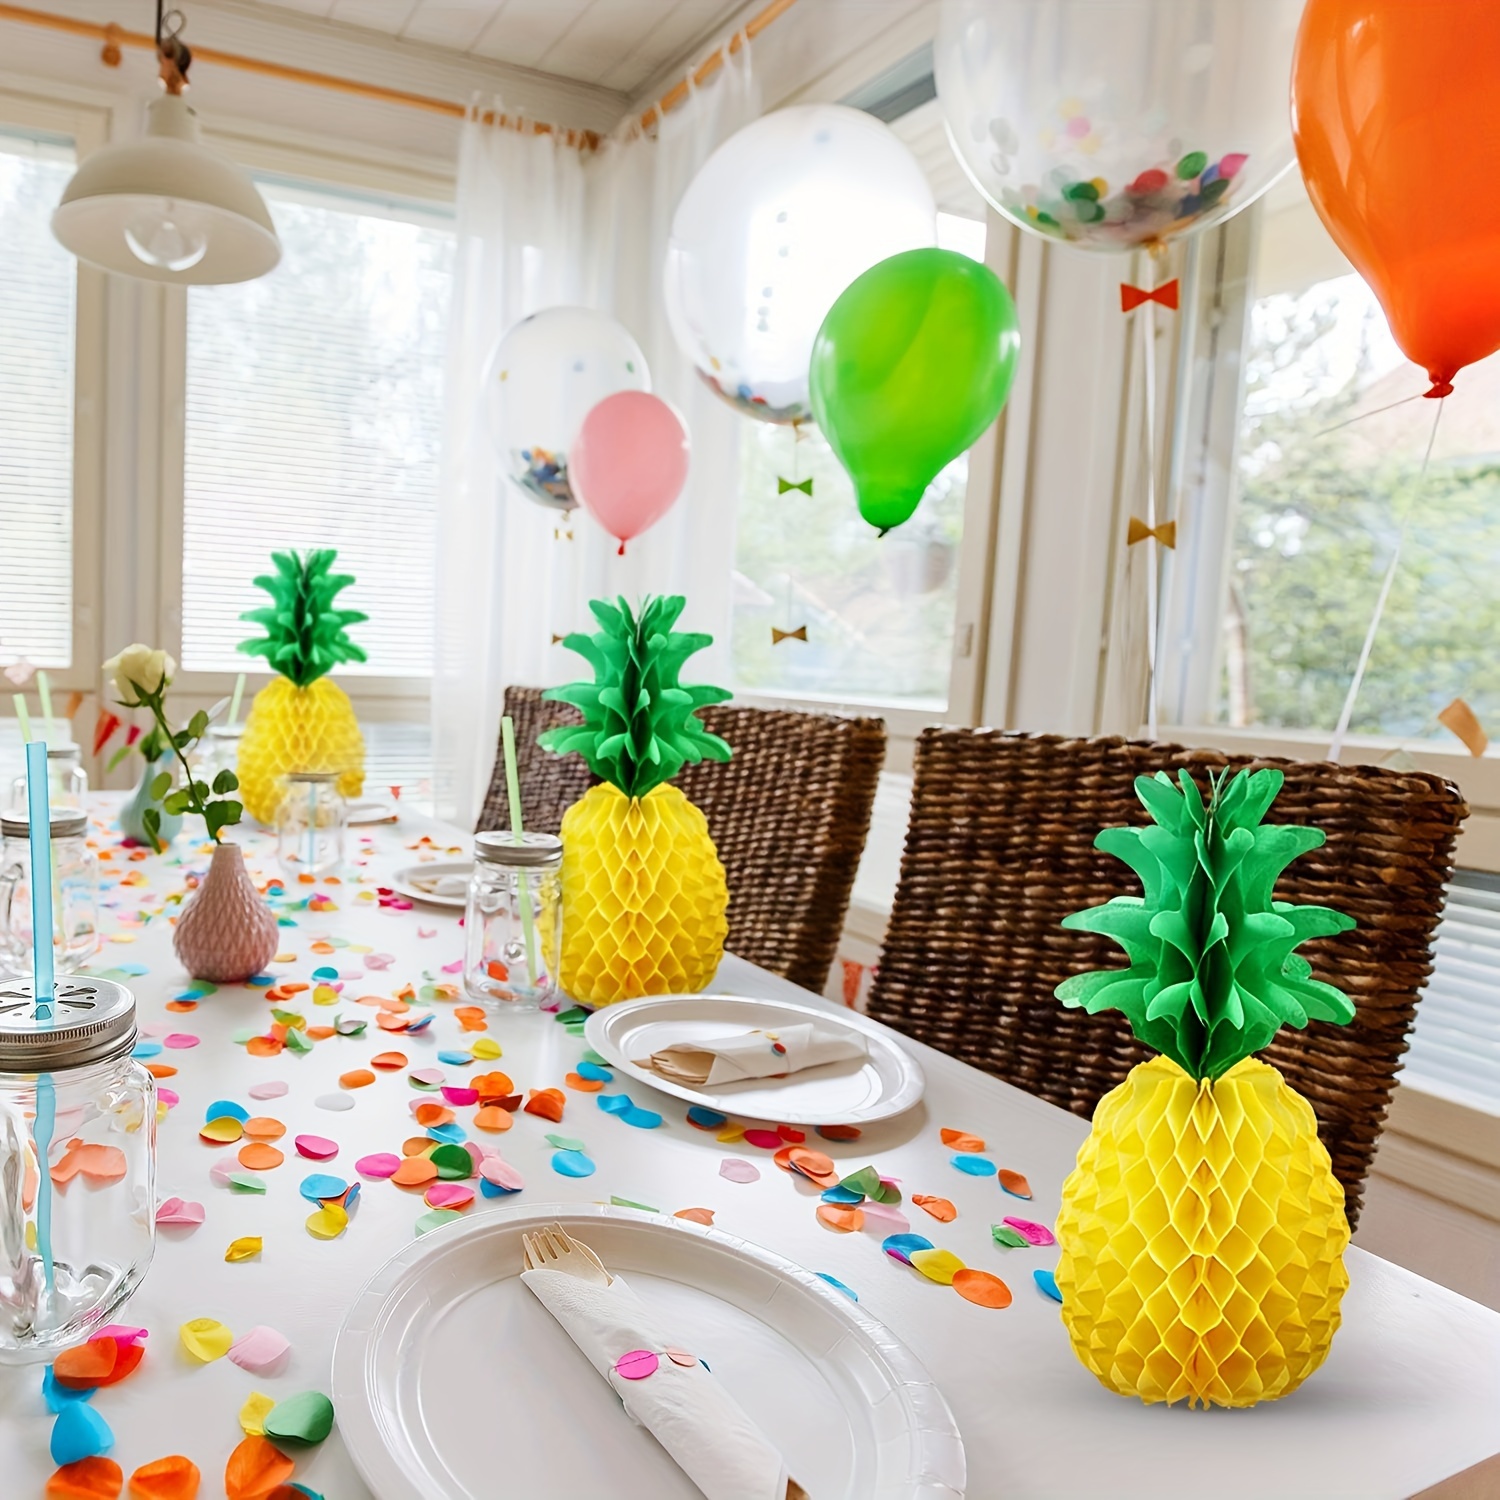 

8pcs, Pineapple Paper Honeycomb Decoration Tissue Party Pineapple Center Hanging Pineapple Table Decoration Summer Tropical Hawaii Beach Decoration